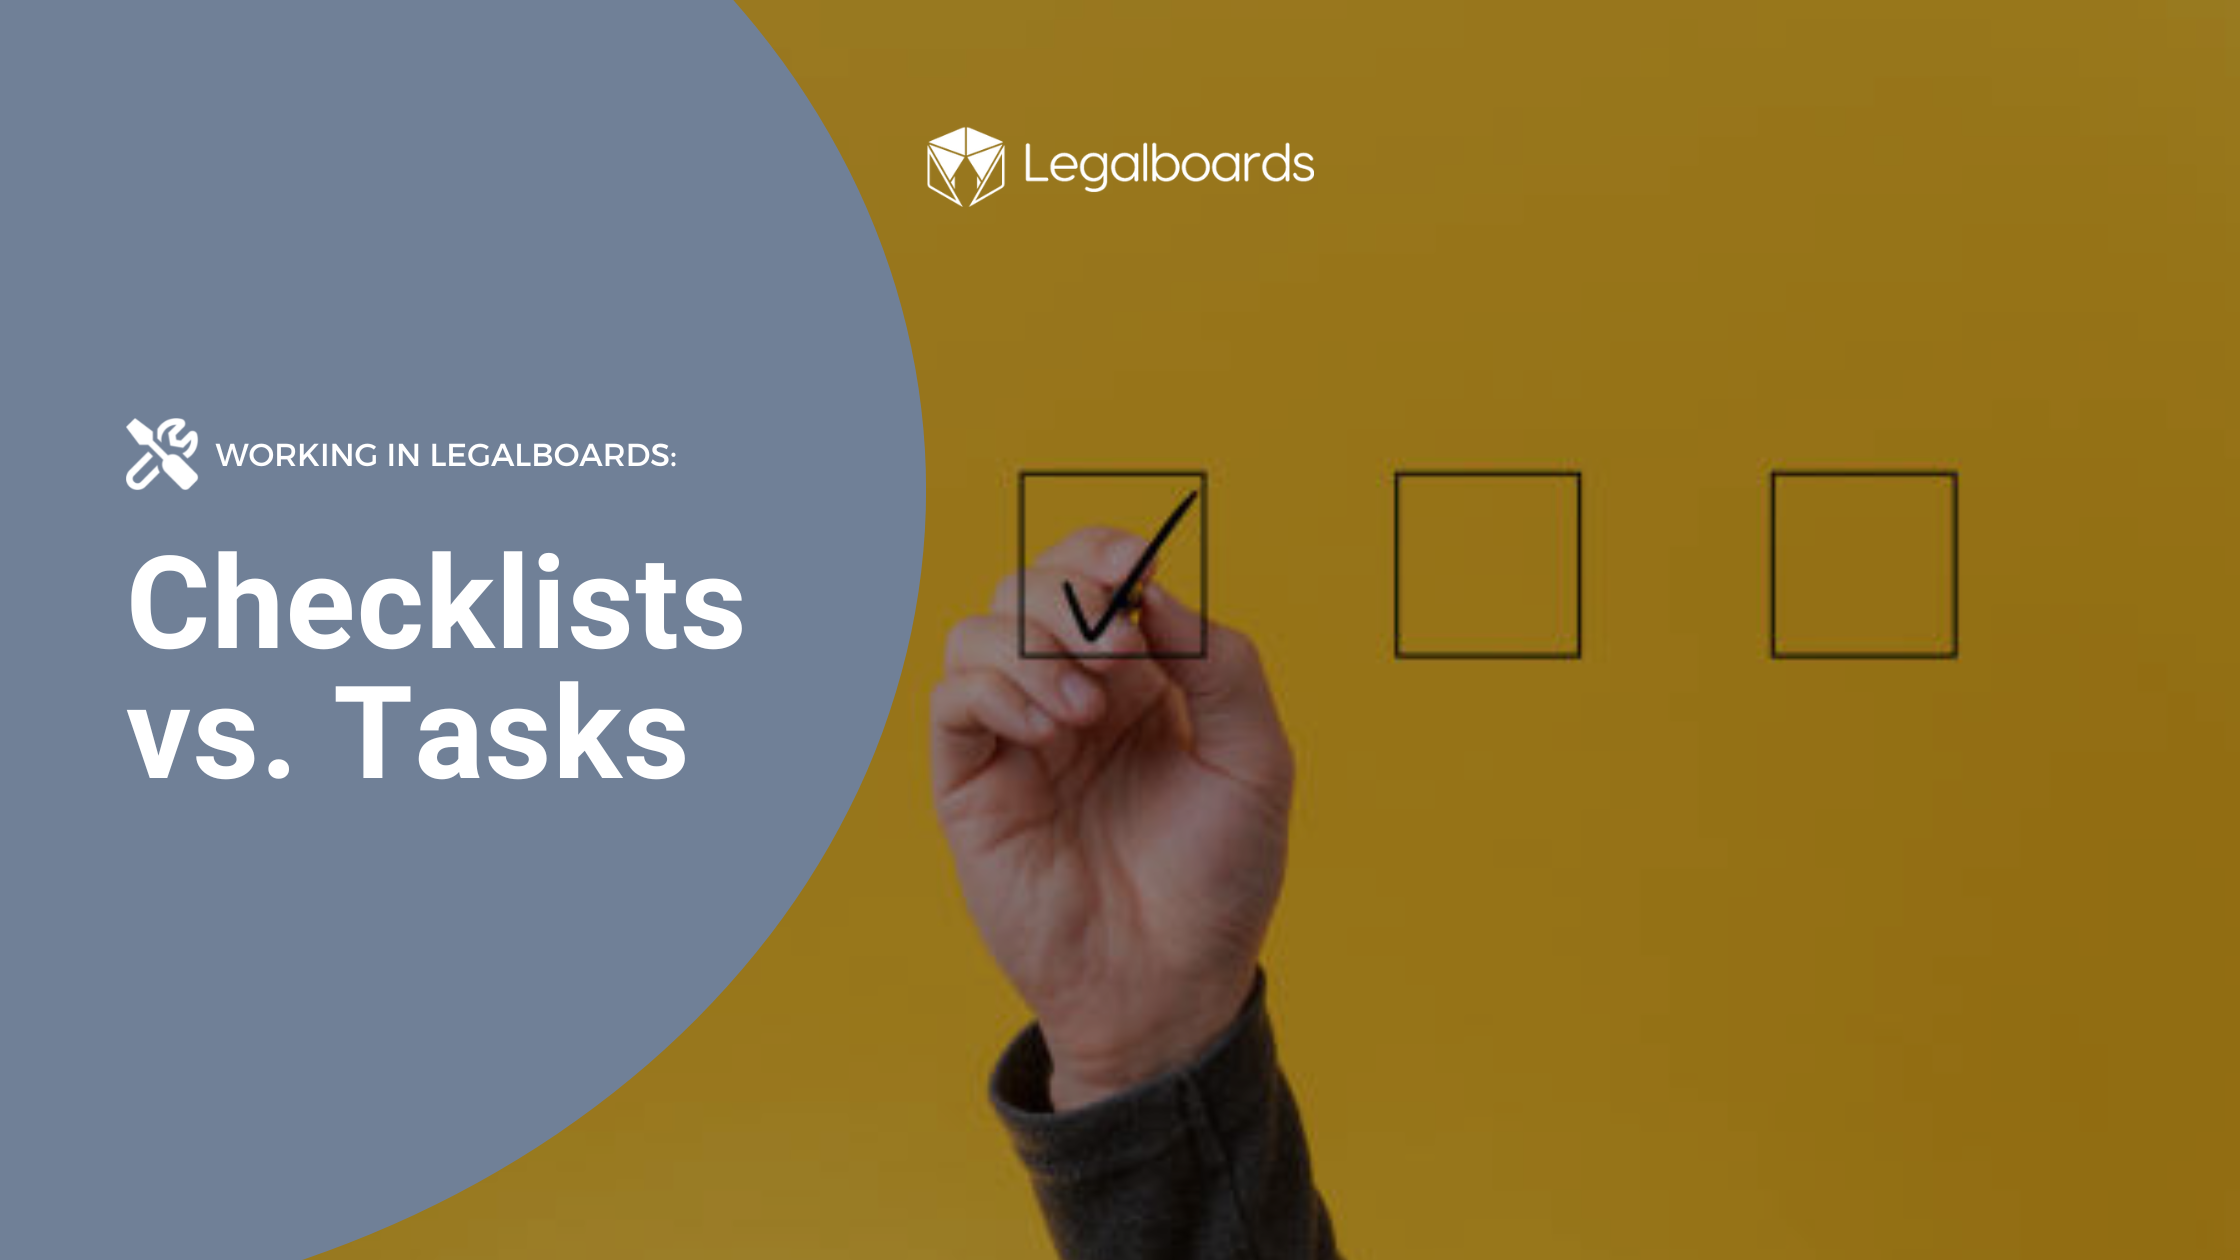 Working in Legalboards: Checklists vs Tasks